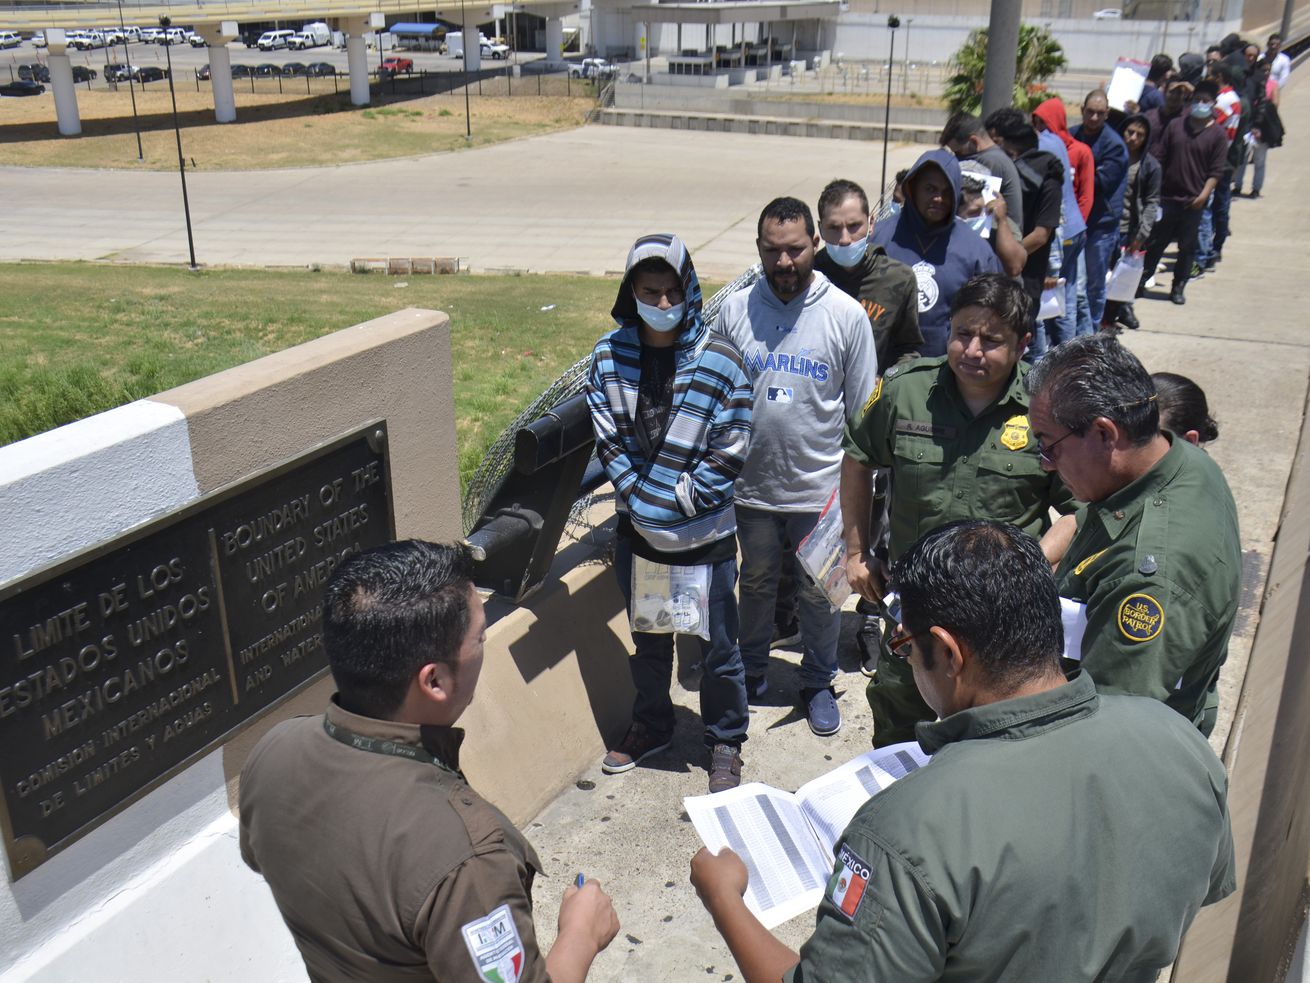 United States Border Patrol officers in Nuevo Laredo, Mexico, return a group of migrants to the Mexico side of the border earlier this month.